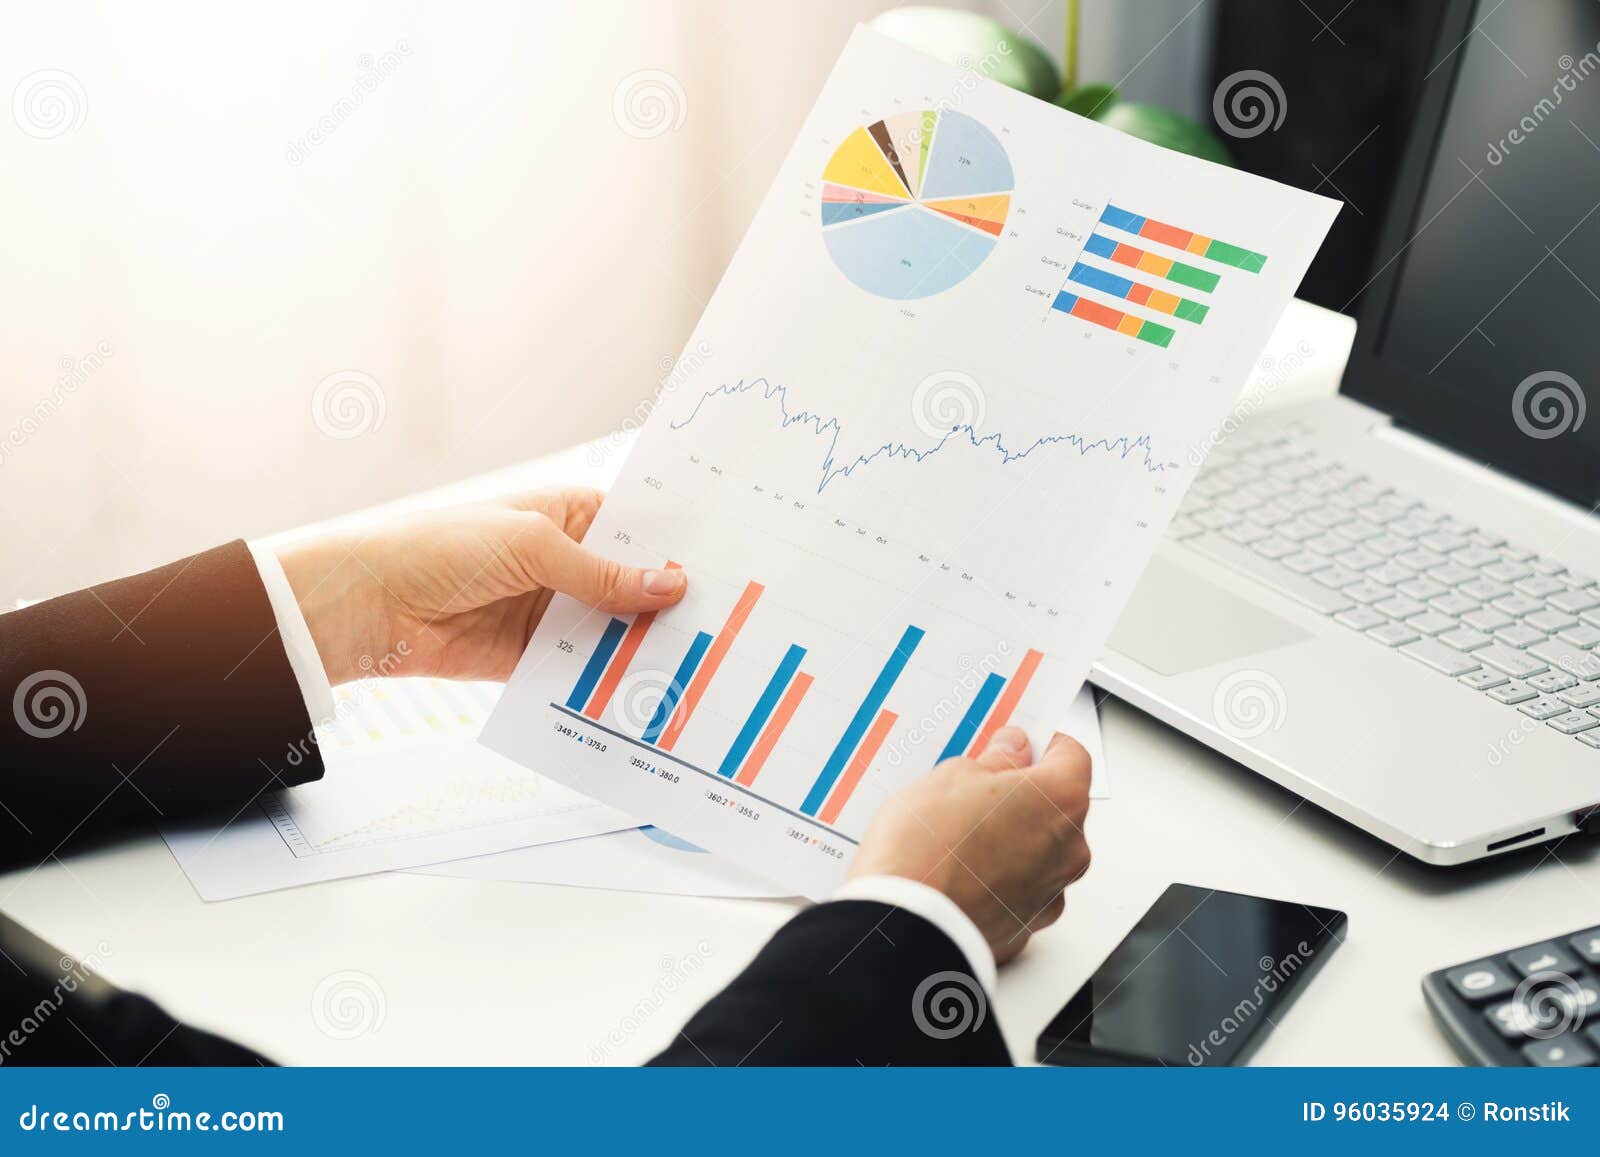 woman at office analyzing business financial graph reports